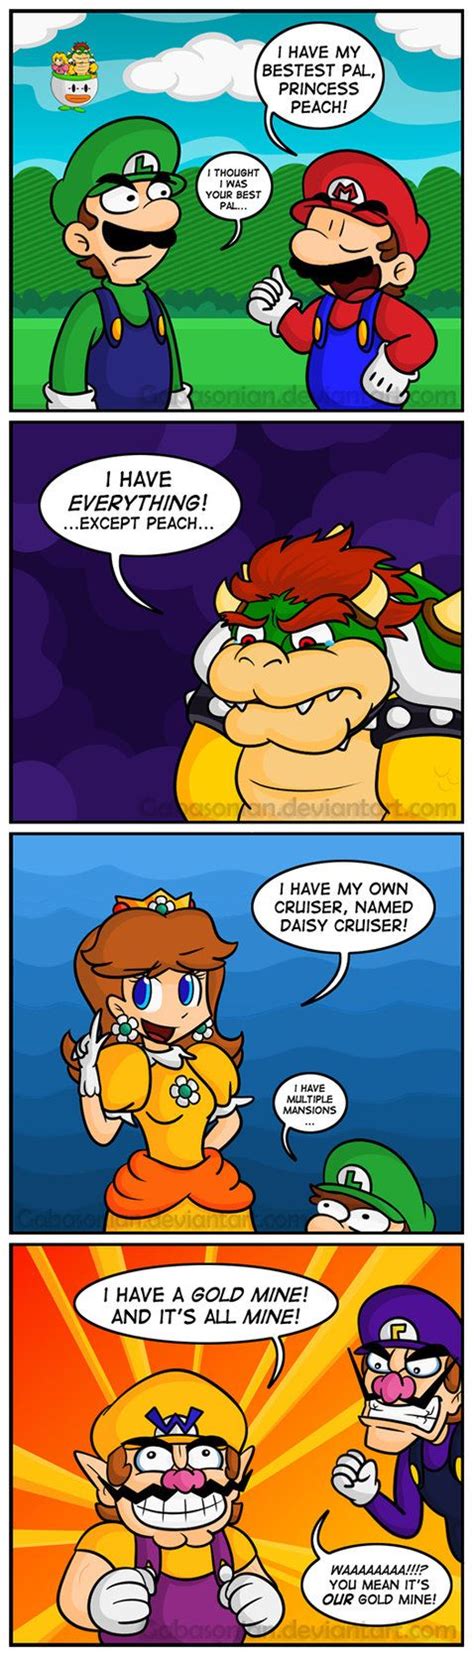 12 Best Bowser Images On Pinterest Bowser Gay And Image